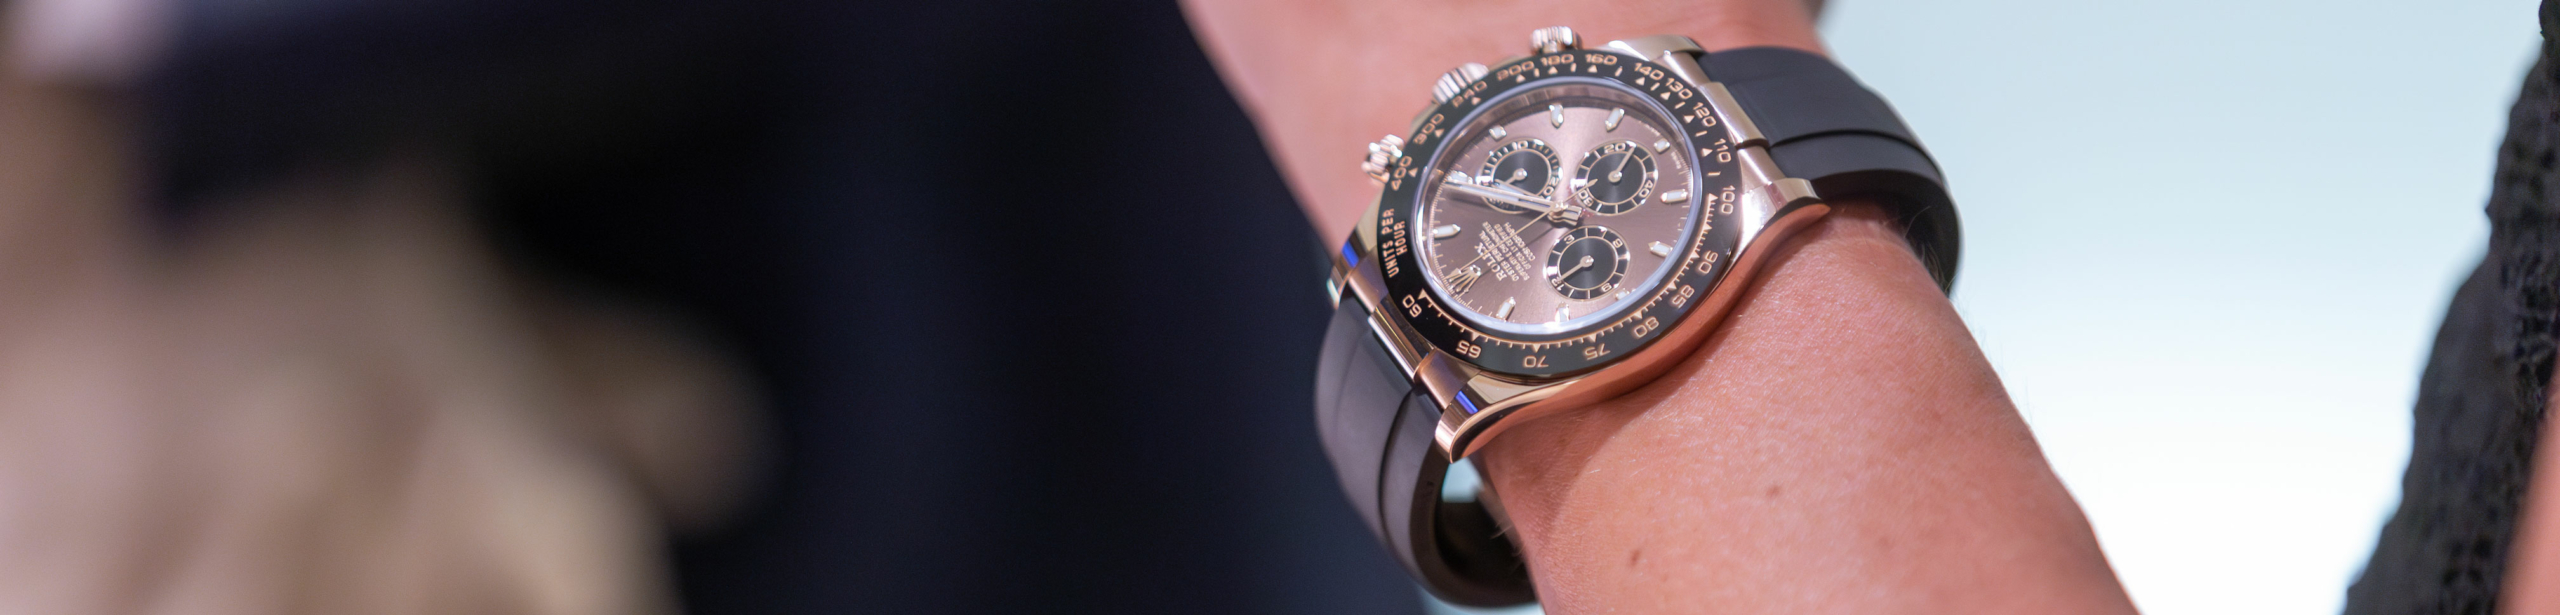 The wrist of a woman with a watch on it.